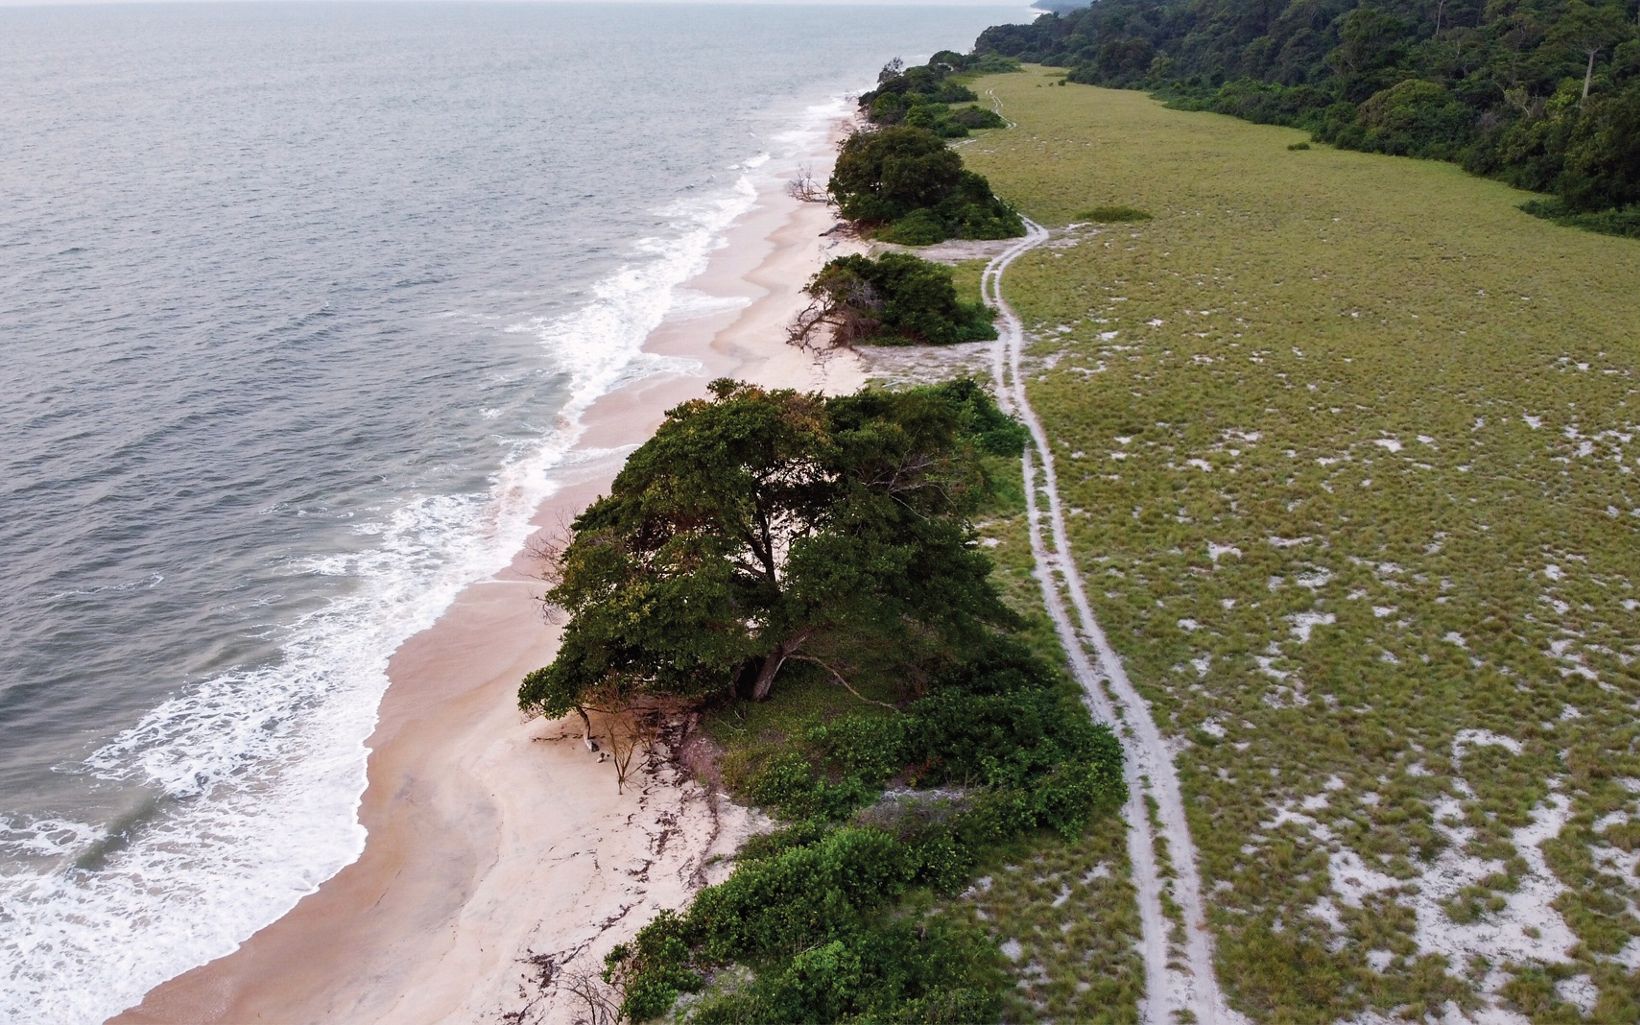 Pongara National Park, Gabon Aerial view of the coastline at Pongara National Park. More than 80 percent of Gabon is covered in rainforest, from its far interior to its Atlantic Ocean beaches. © Roshni Lodhia